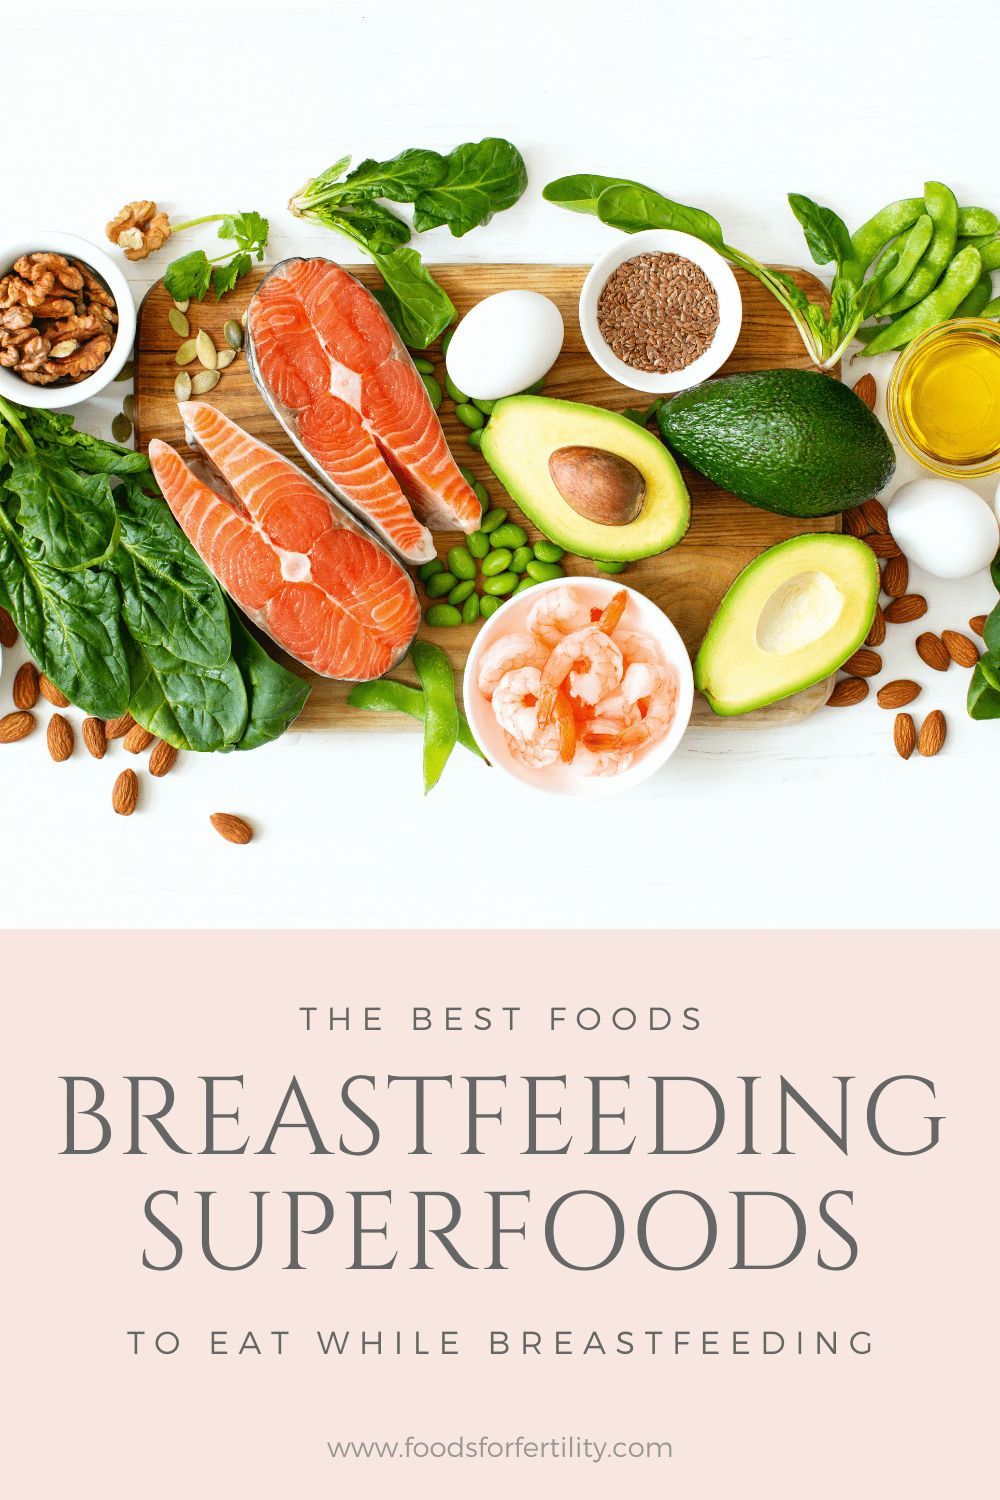 Best Foods to Eat While Breastfeeding